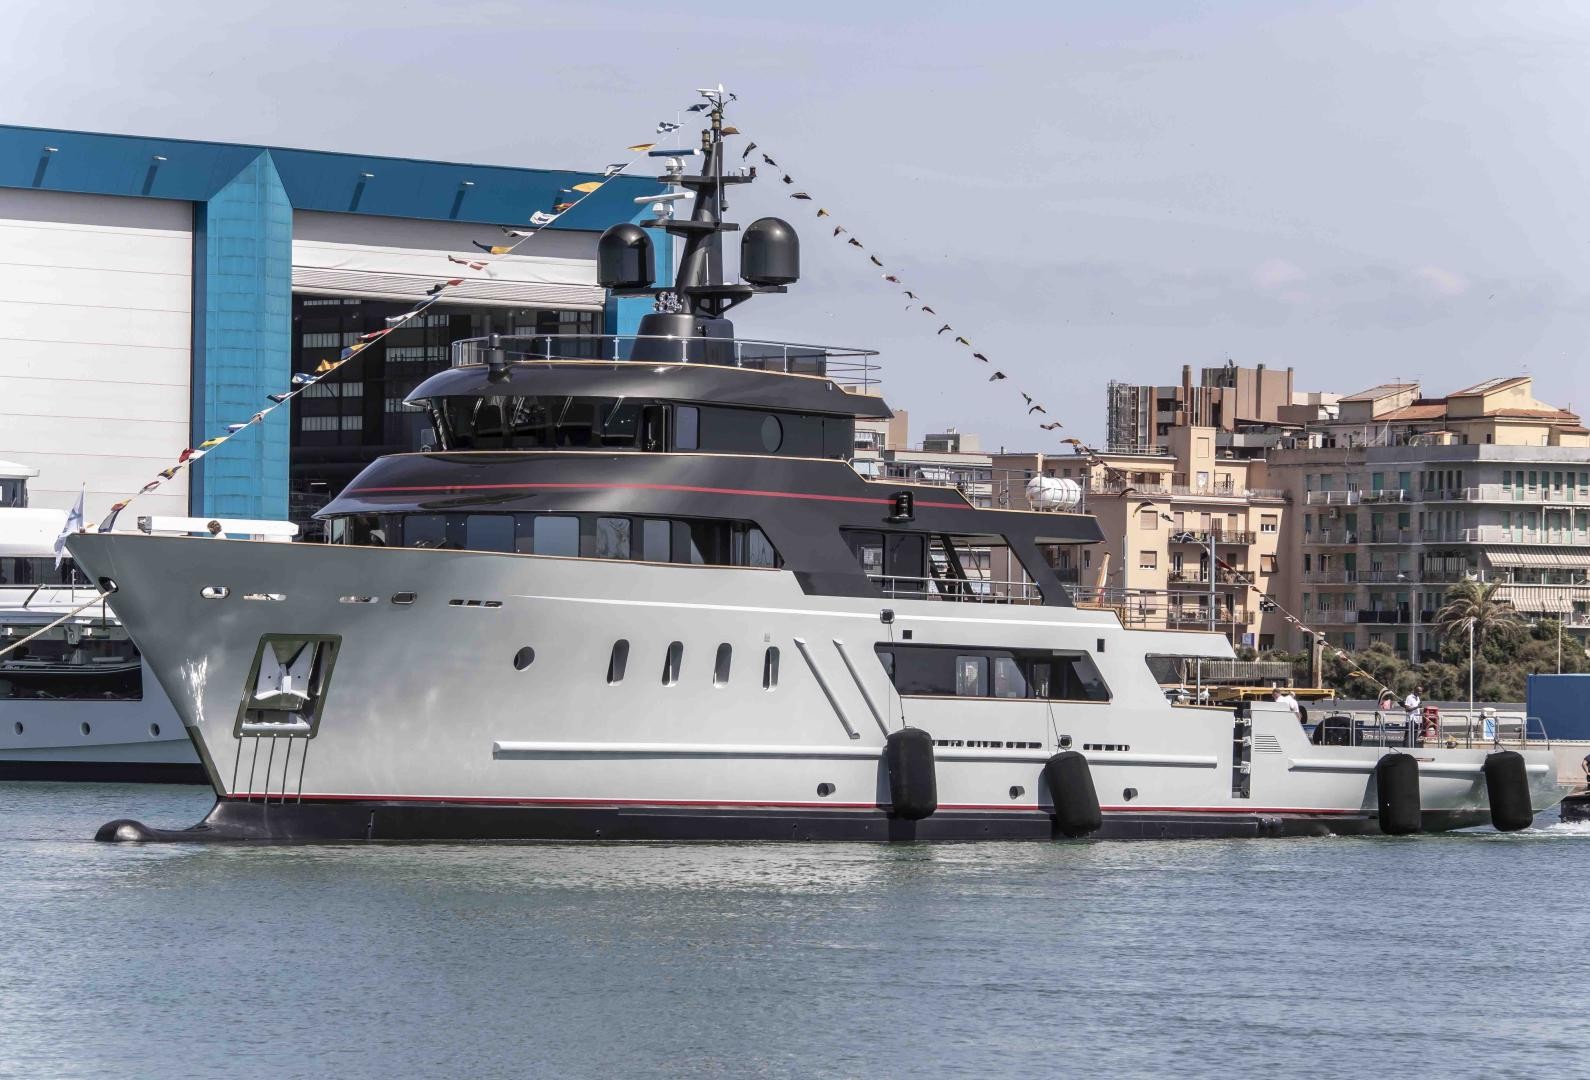 Lusben is proud to return to the Monaco Yacht Show 2021